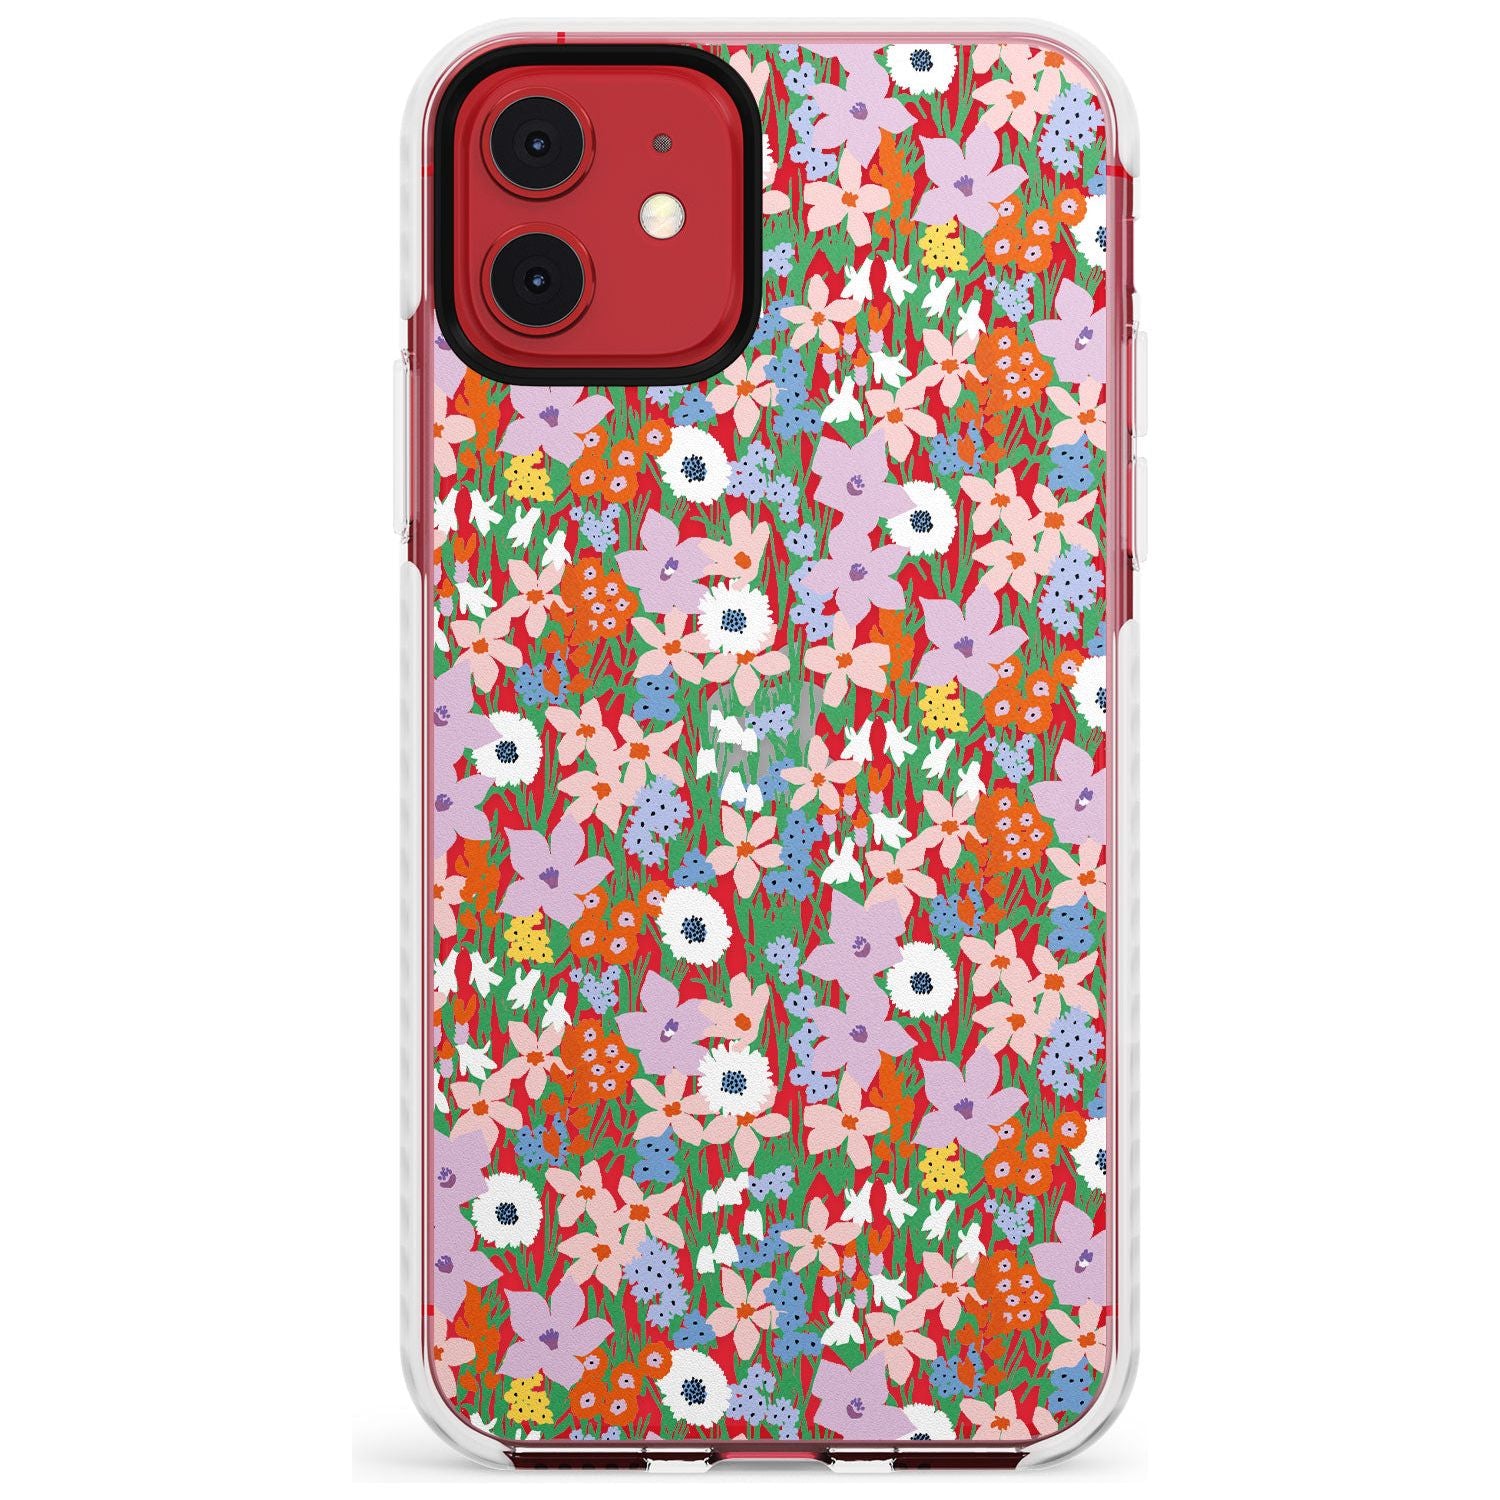 Jazzy Floral Mix: Transparent Slim TPU Phone Case for iPhone 11